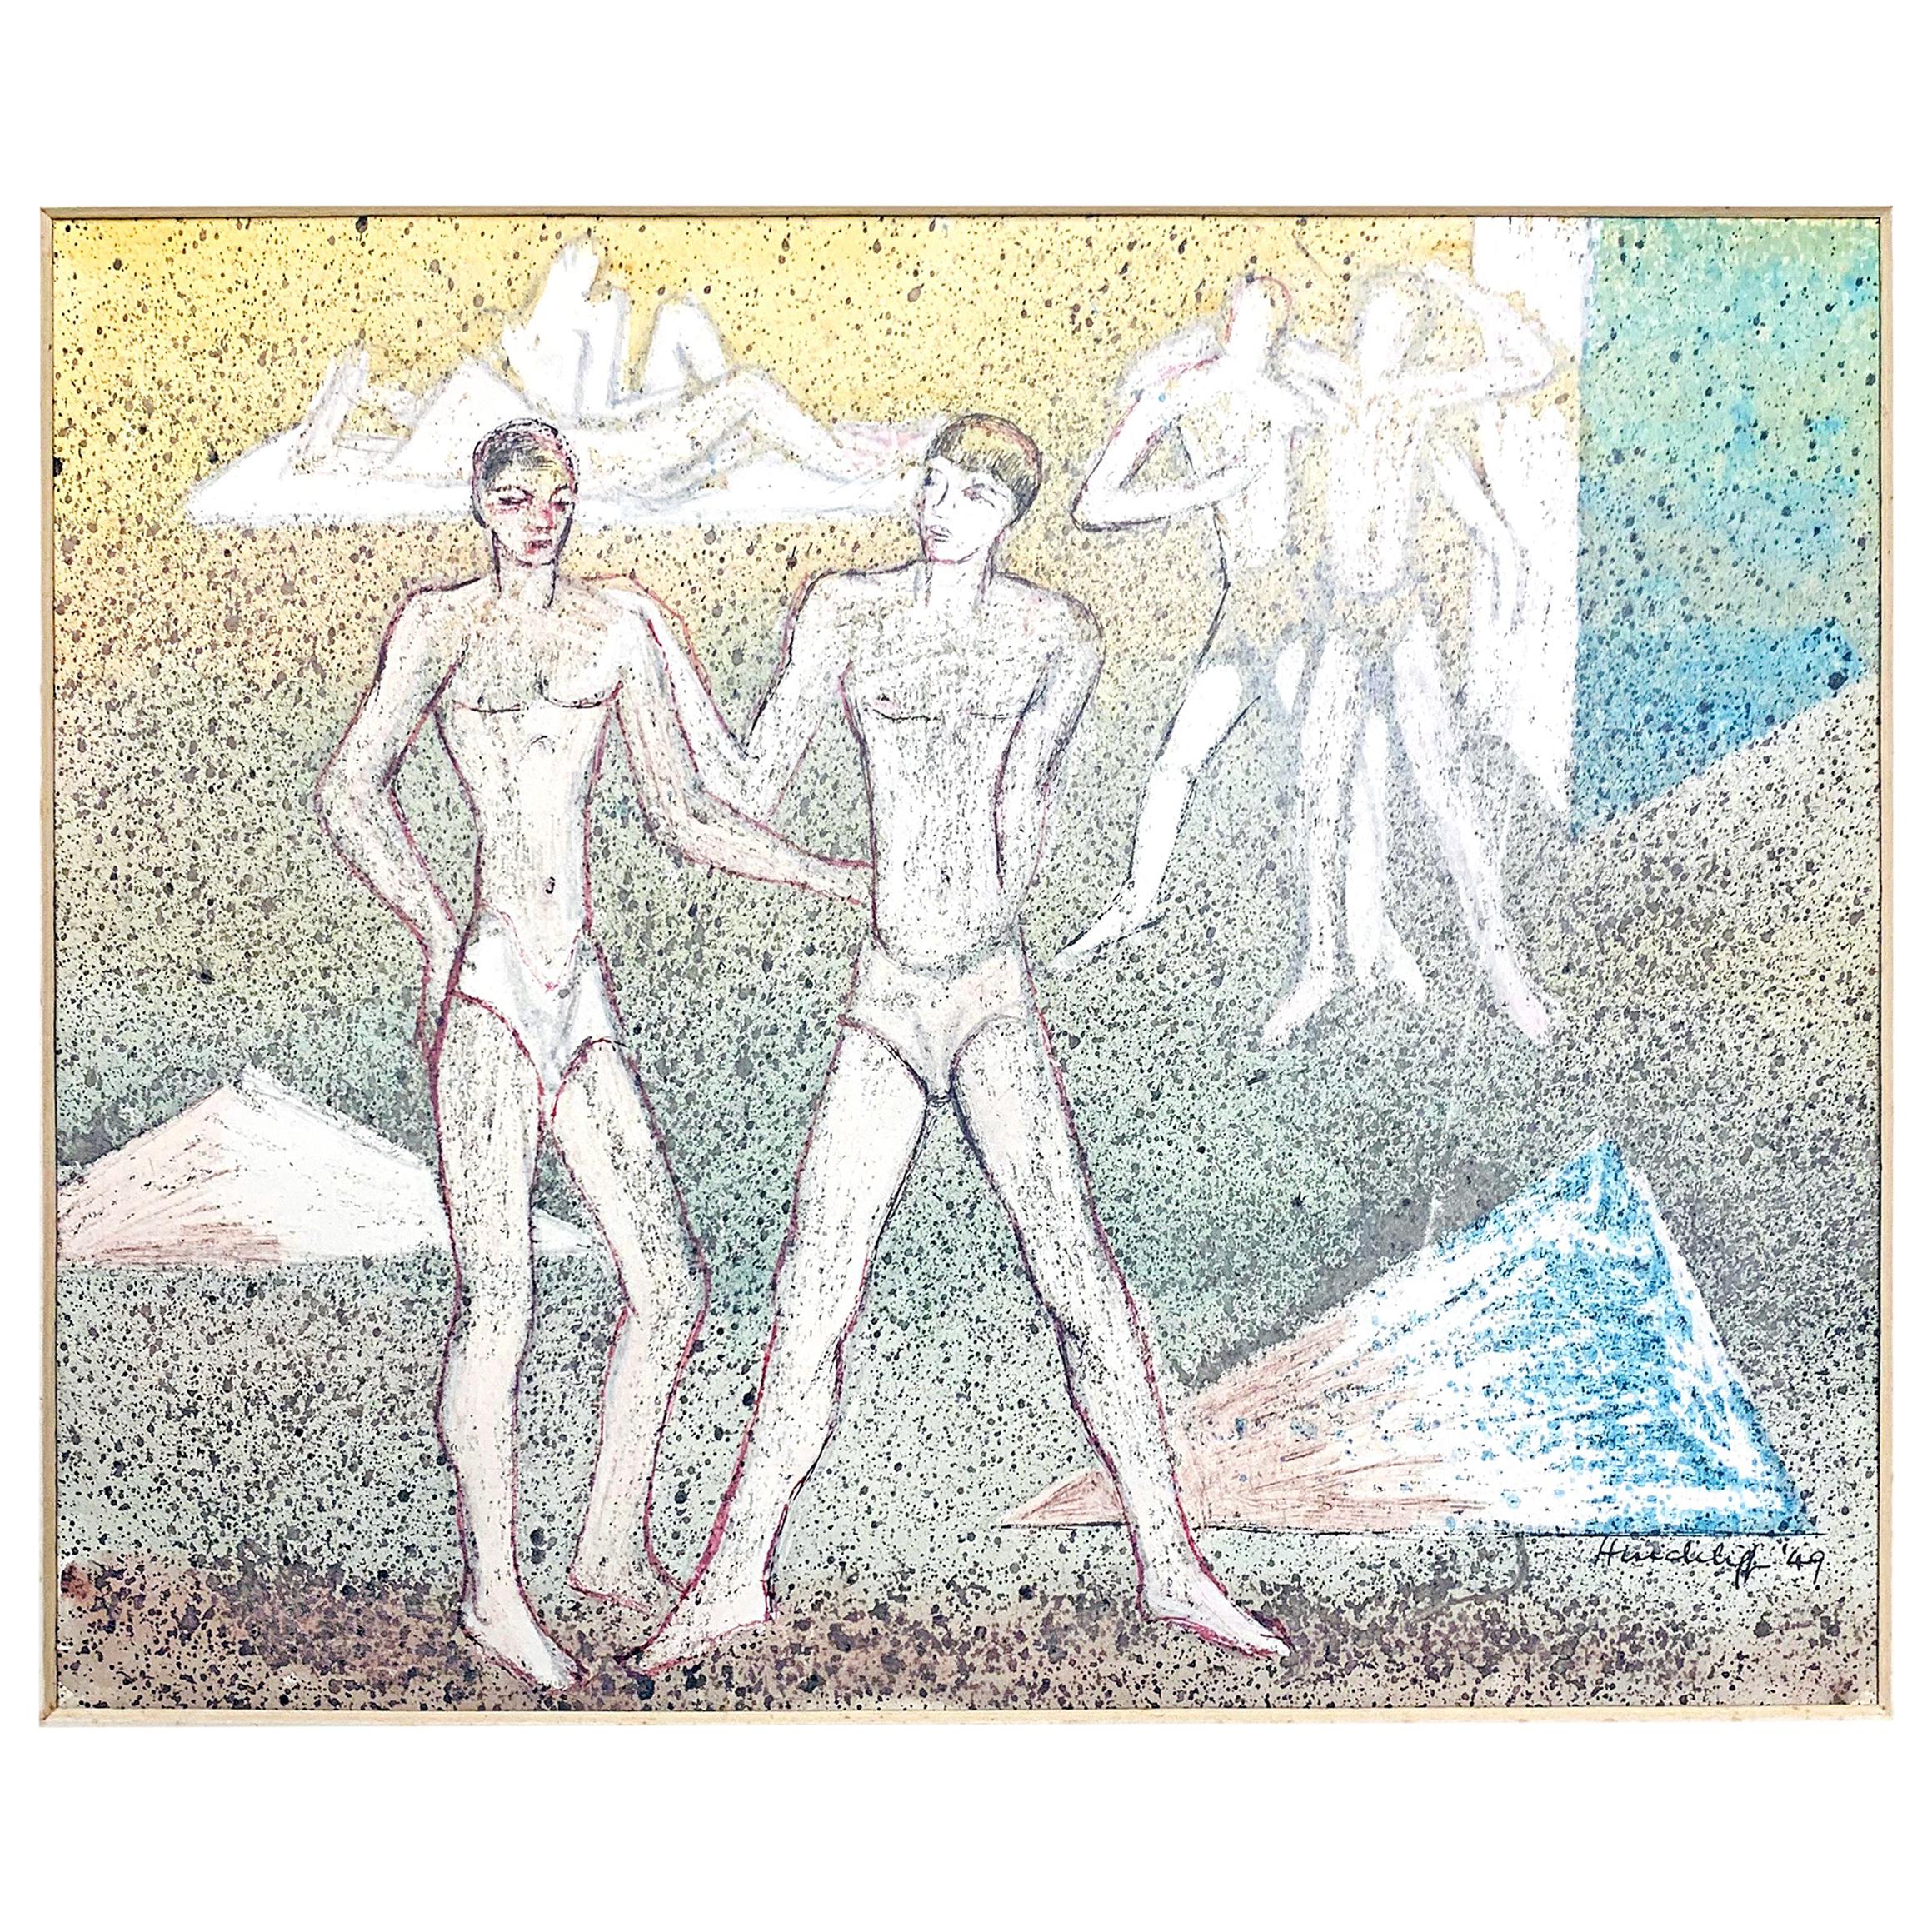 "Adolescent Parallels, " Midcentury Mural Design with Male Youths, 1949 For Sale